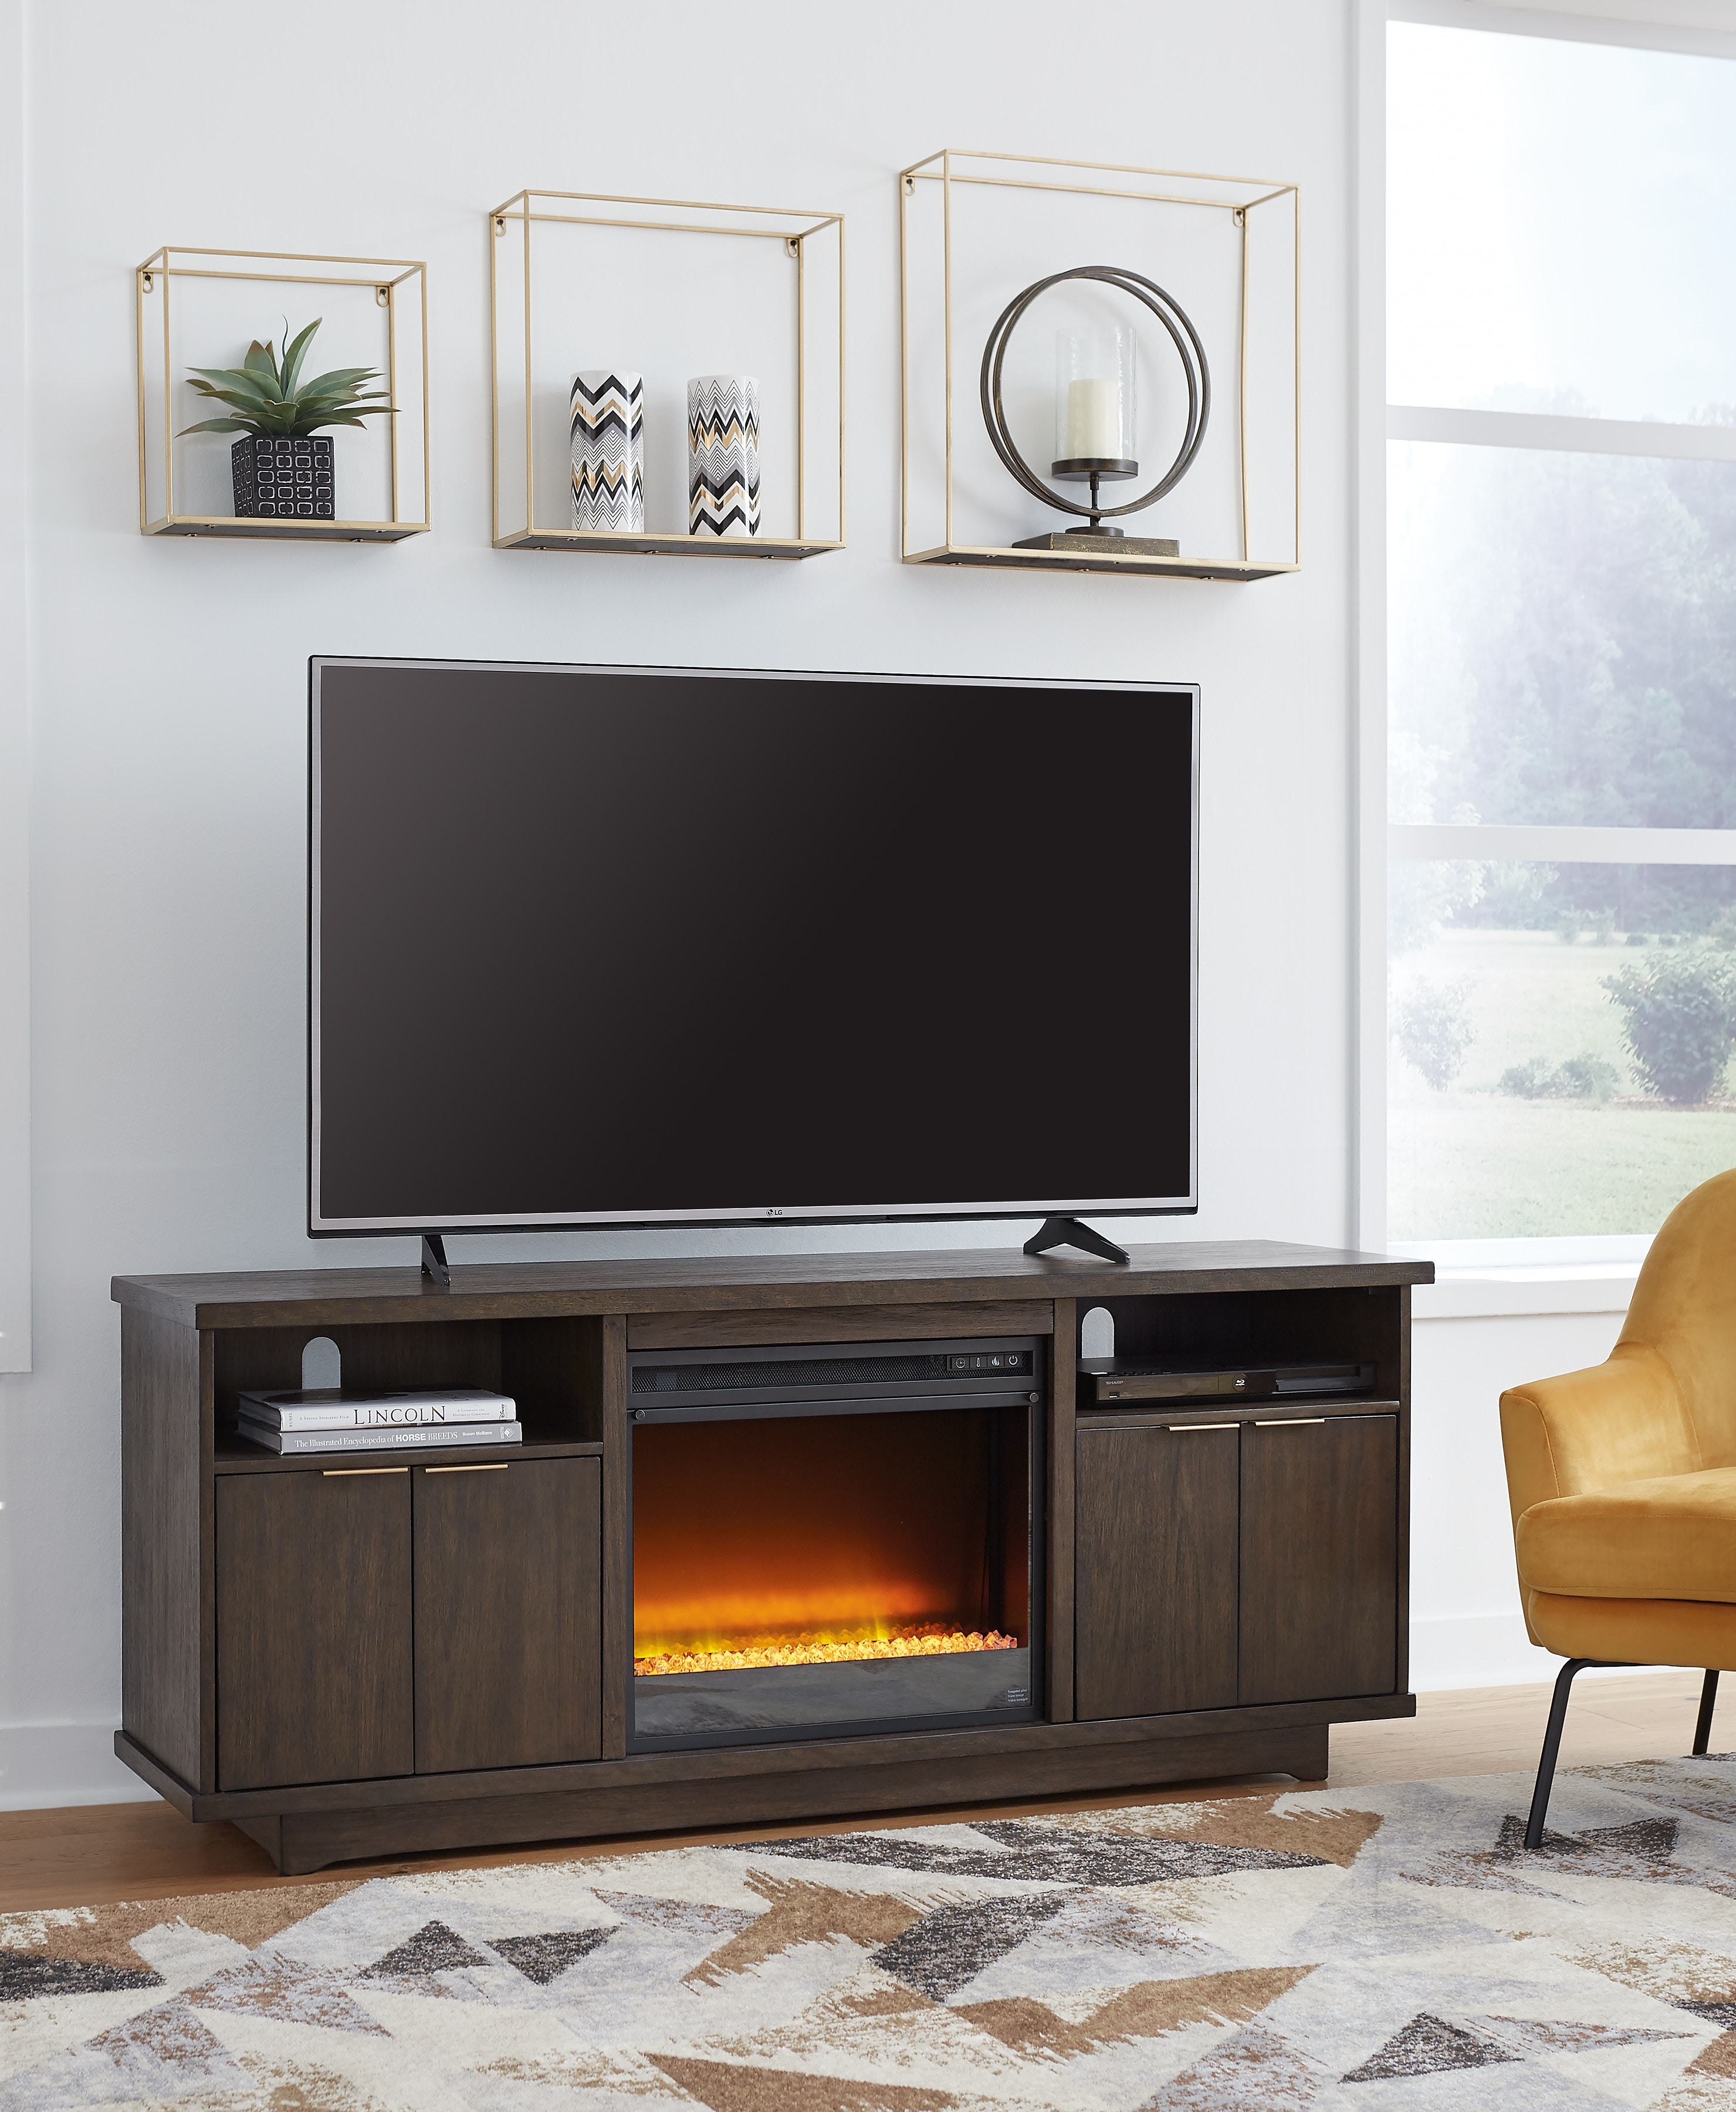 Signature Design By Ashley Home Entertainment Brazburn 66 Tv Stand With Electric Fireplace W955w1